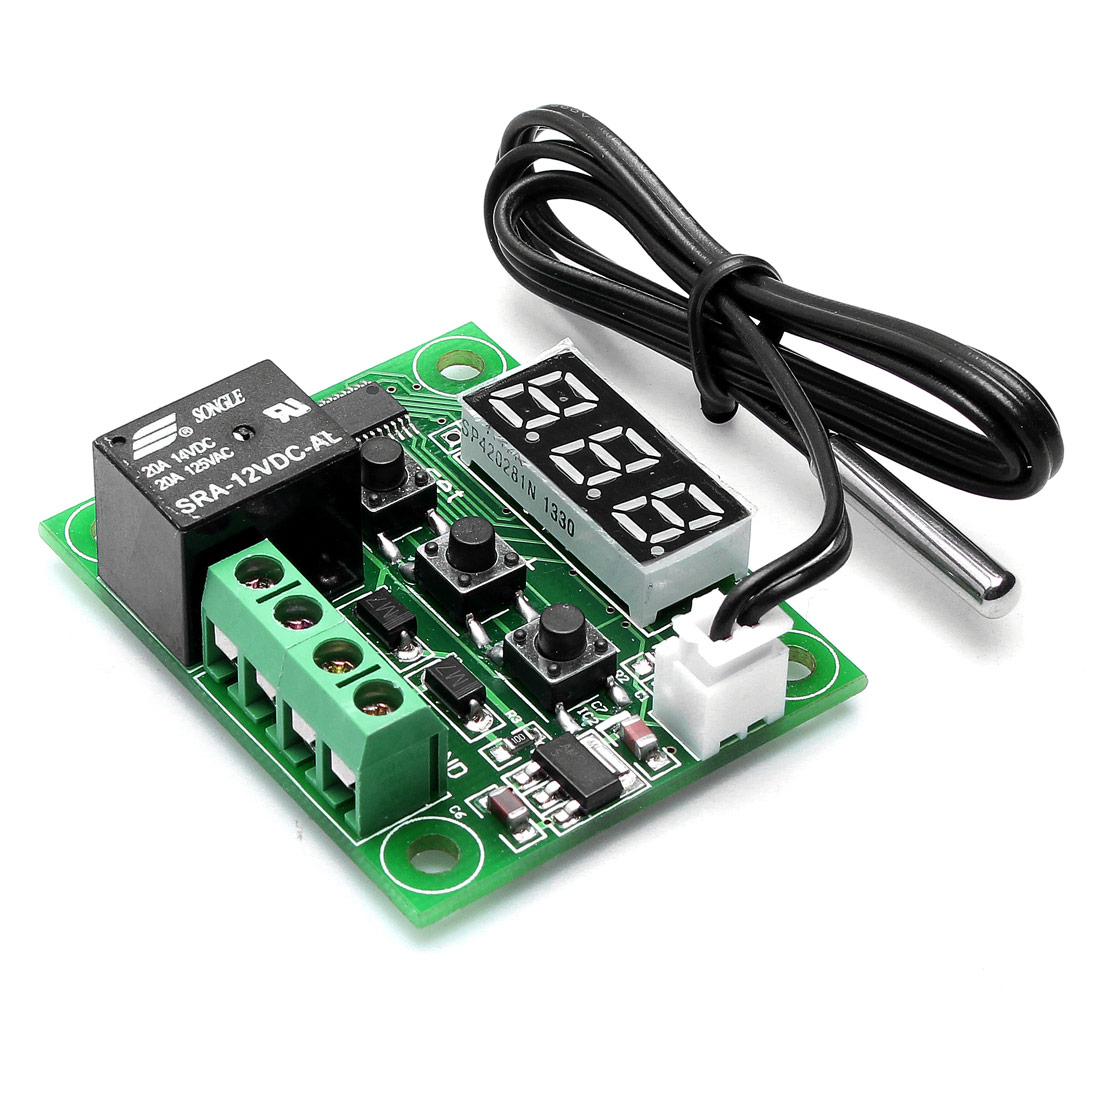 W1209 -50C to 110C Digital Thermostat Temperature Controller Module Installation and Operating Instructions